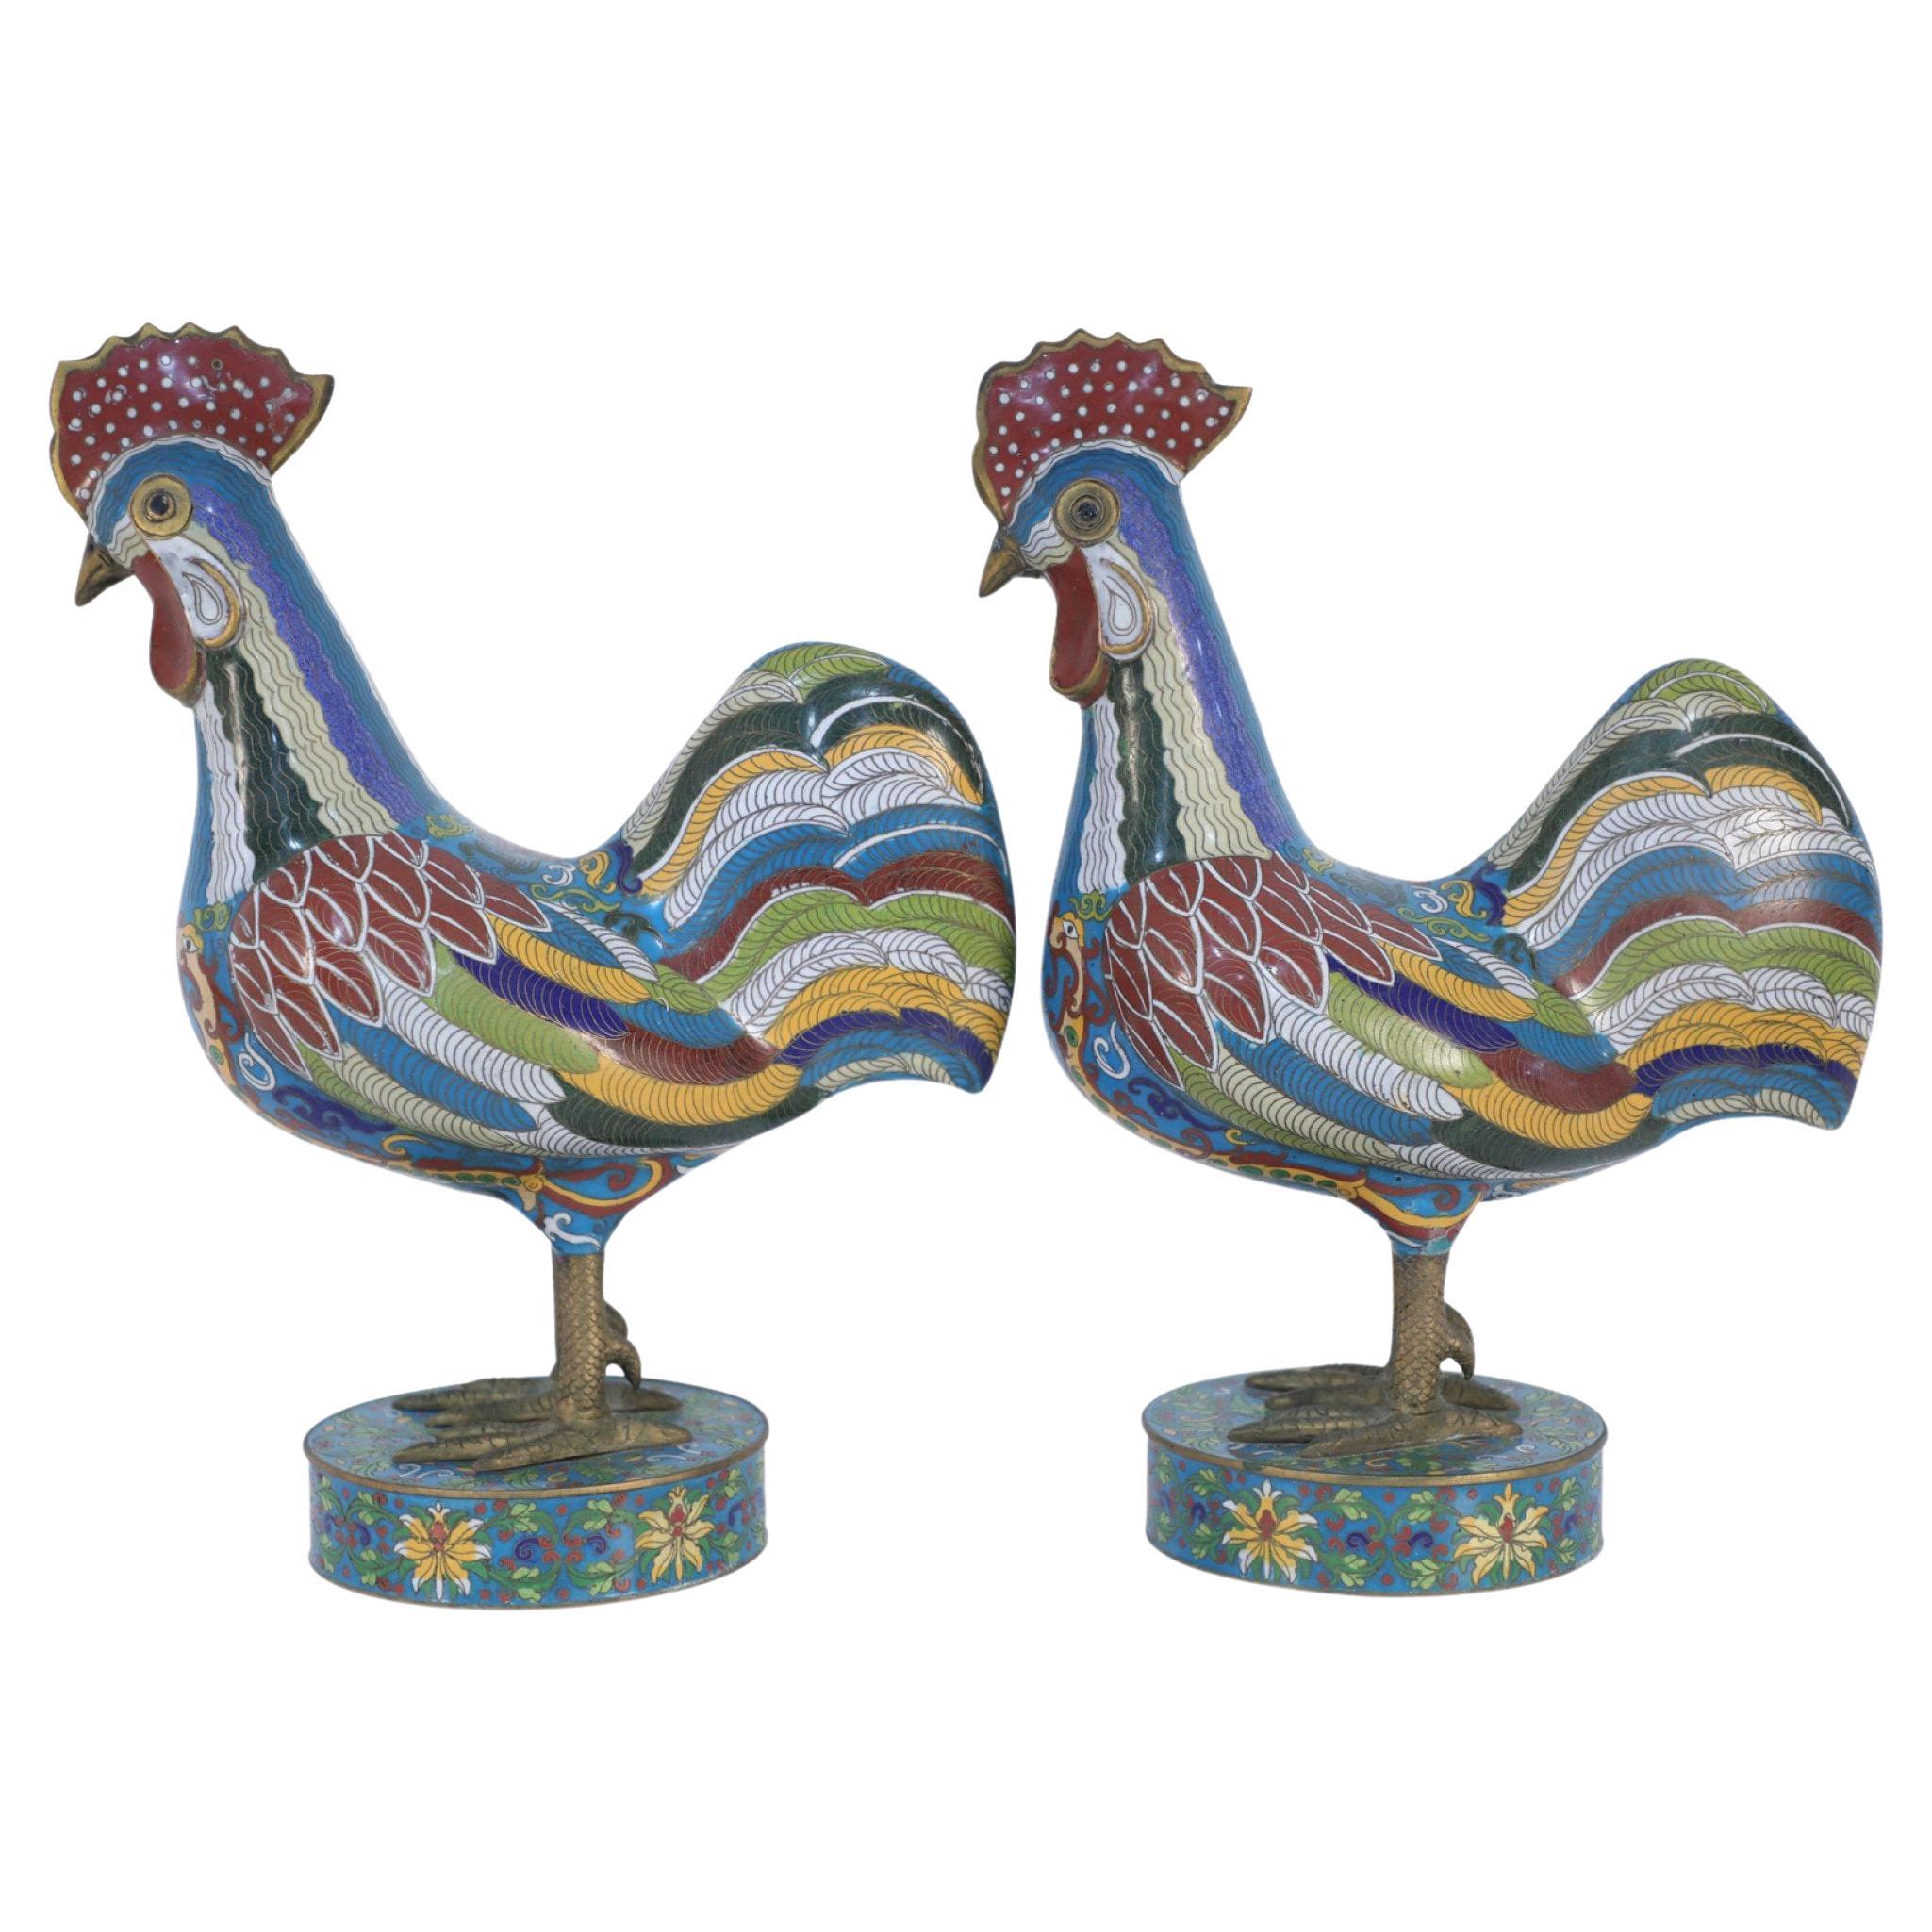 Pair of Antique Chinese Multi-Colored Cloisonne Rooster Sculptures For Sale